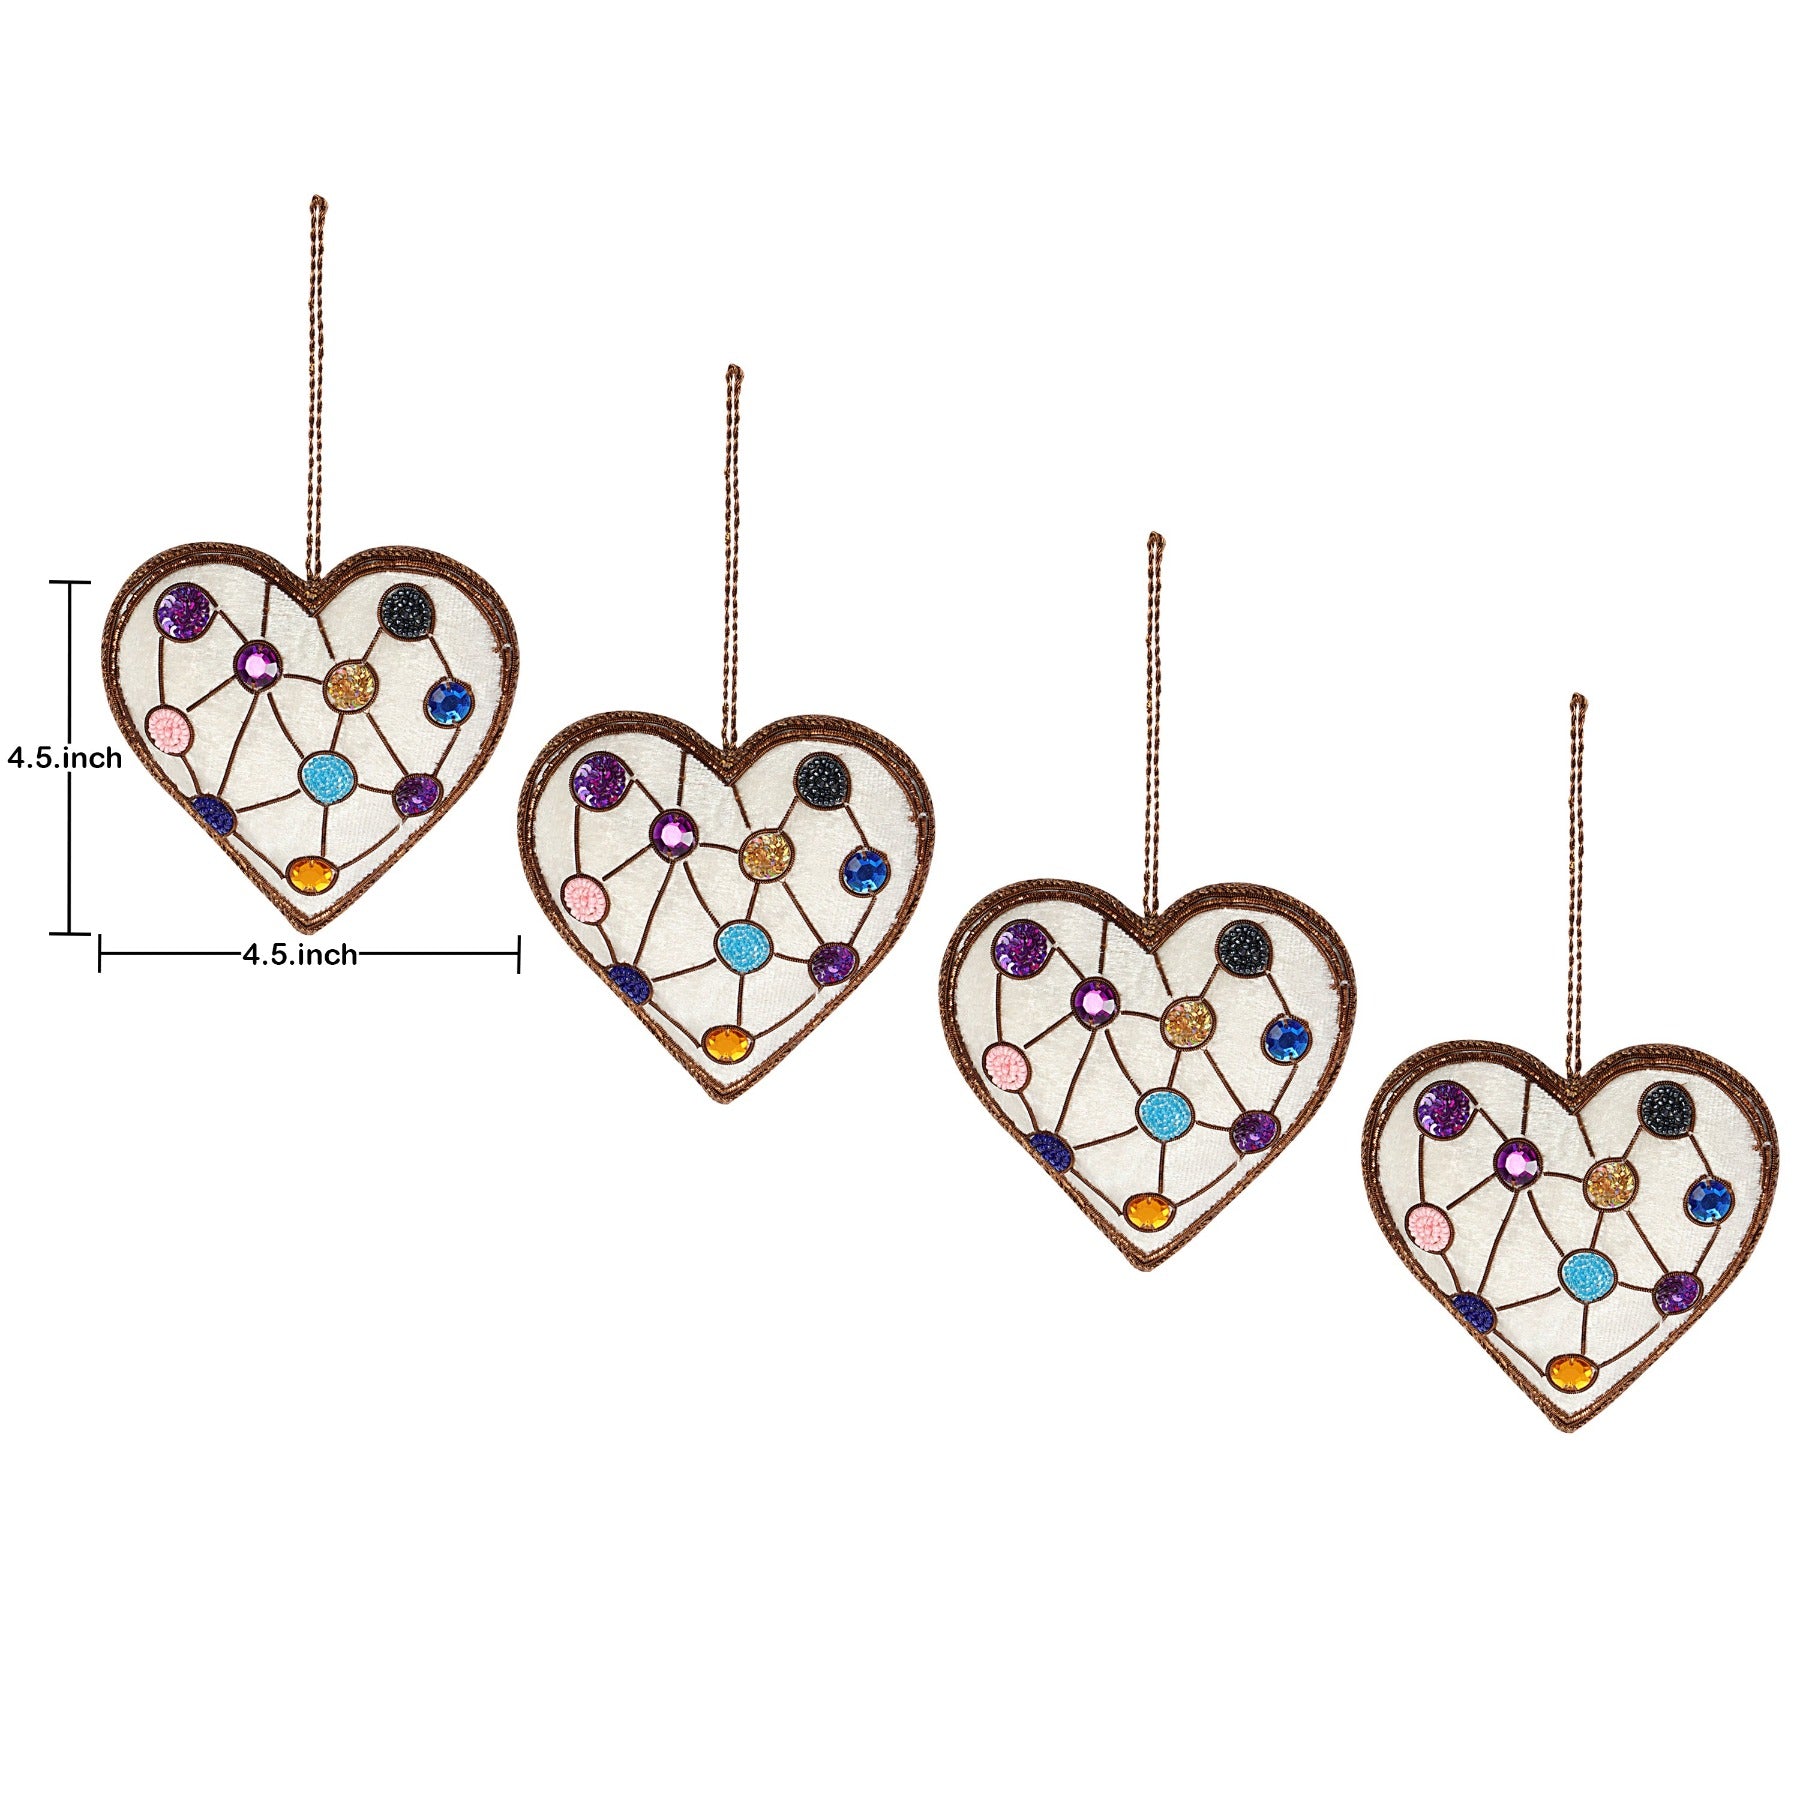 White Glitter Hearts christmas ornaments set of 4 pieces for holiday decor (1SET=4PC) holiday decor